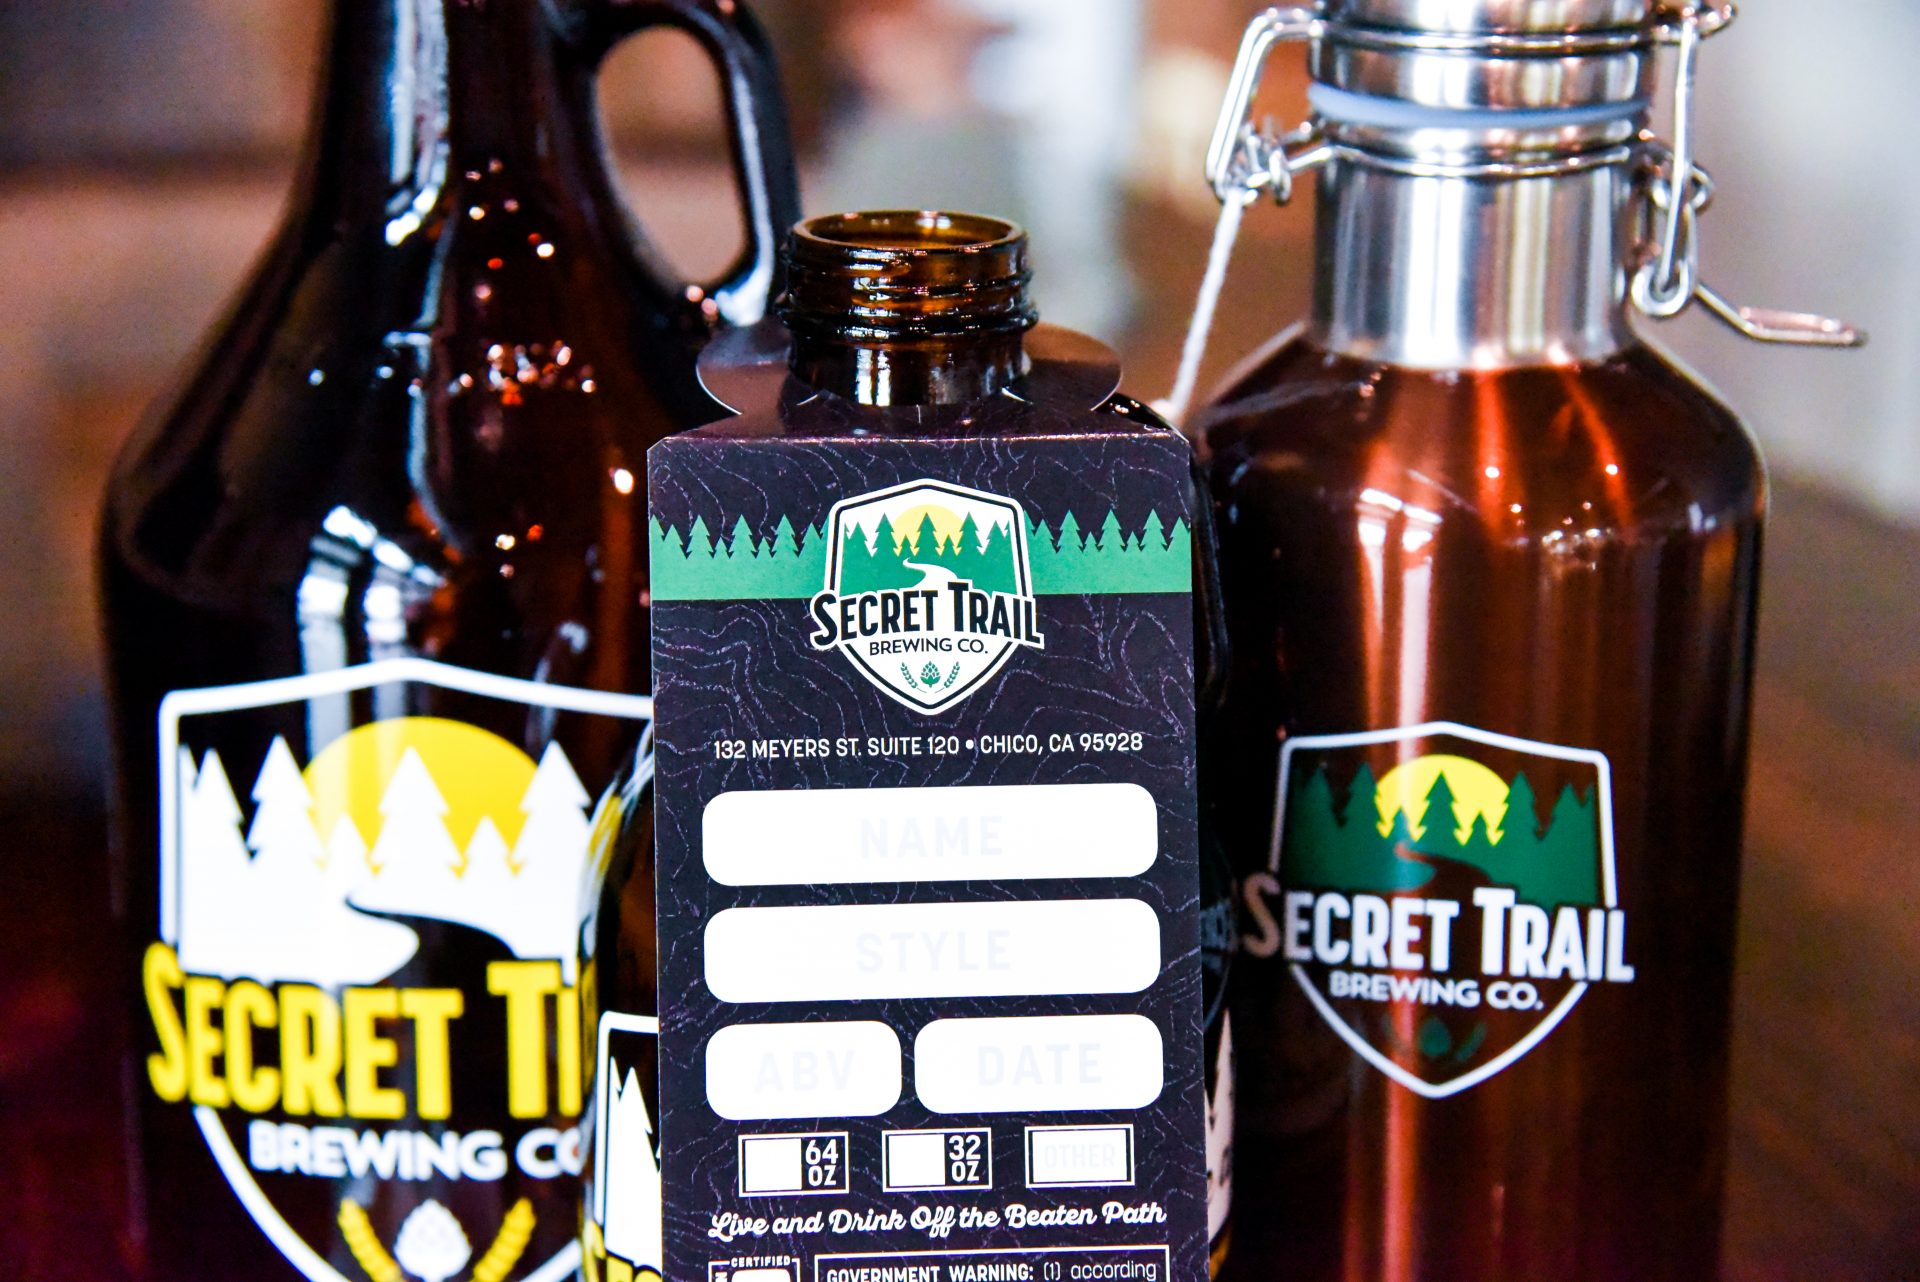 Secret Trail growler tags and wraps